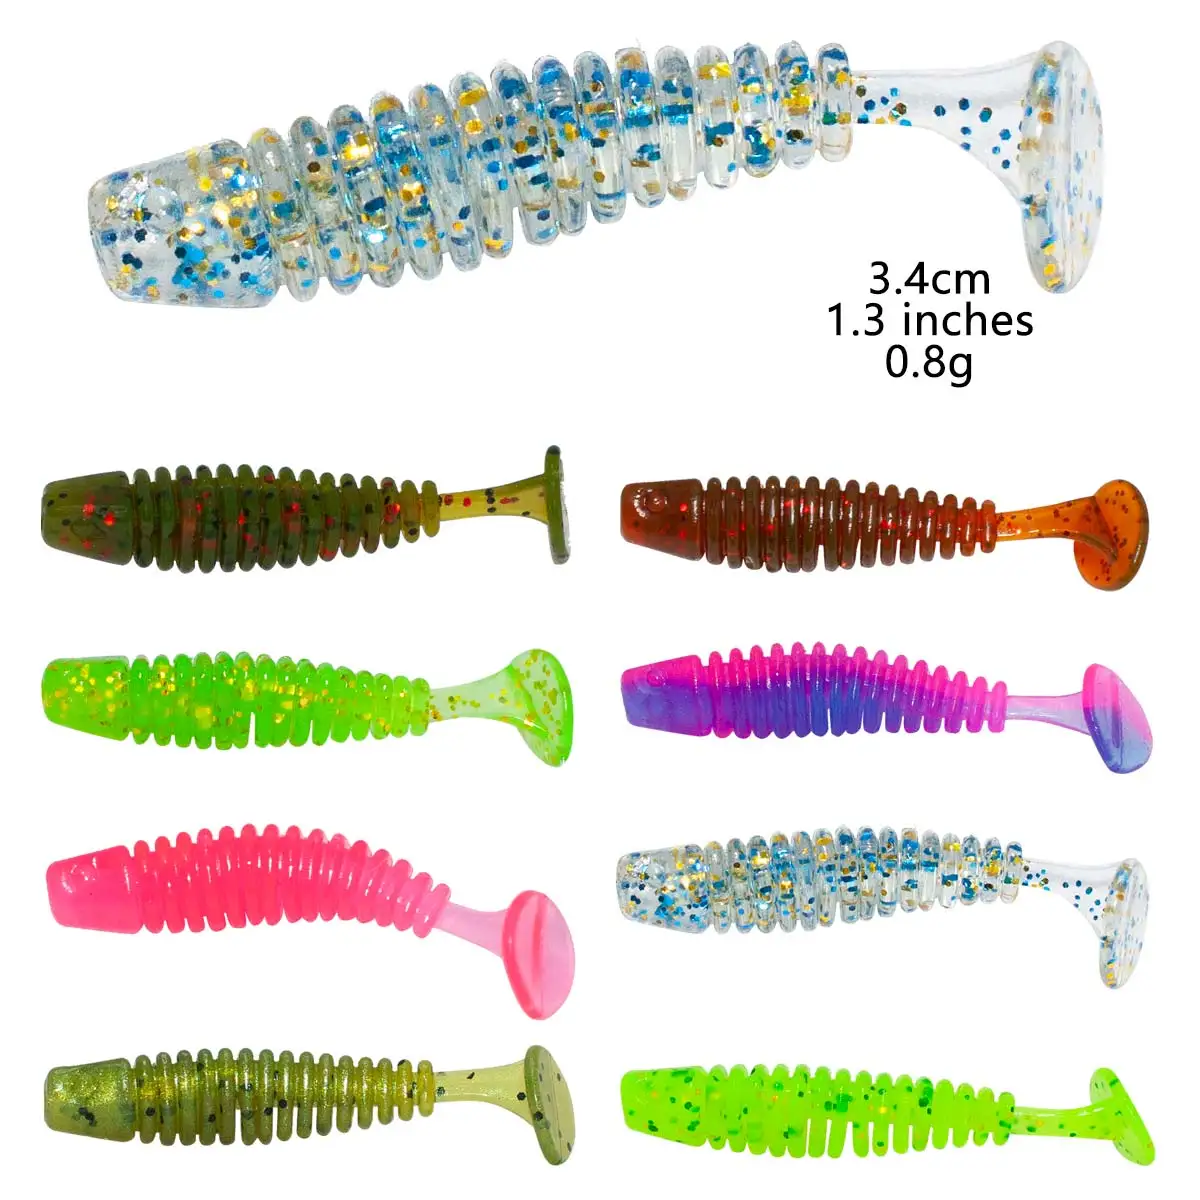 https://ae01.alicdn.com/kf/S819e7a40bb61434b9591ad87ebb794a7L/Soft-Lures-3-4cm-0-8g-15pcs-Paddle-Tail-Baby-Fish-Texas-Rigs-Jig-Head-Trout.jpg